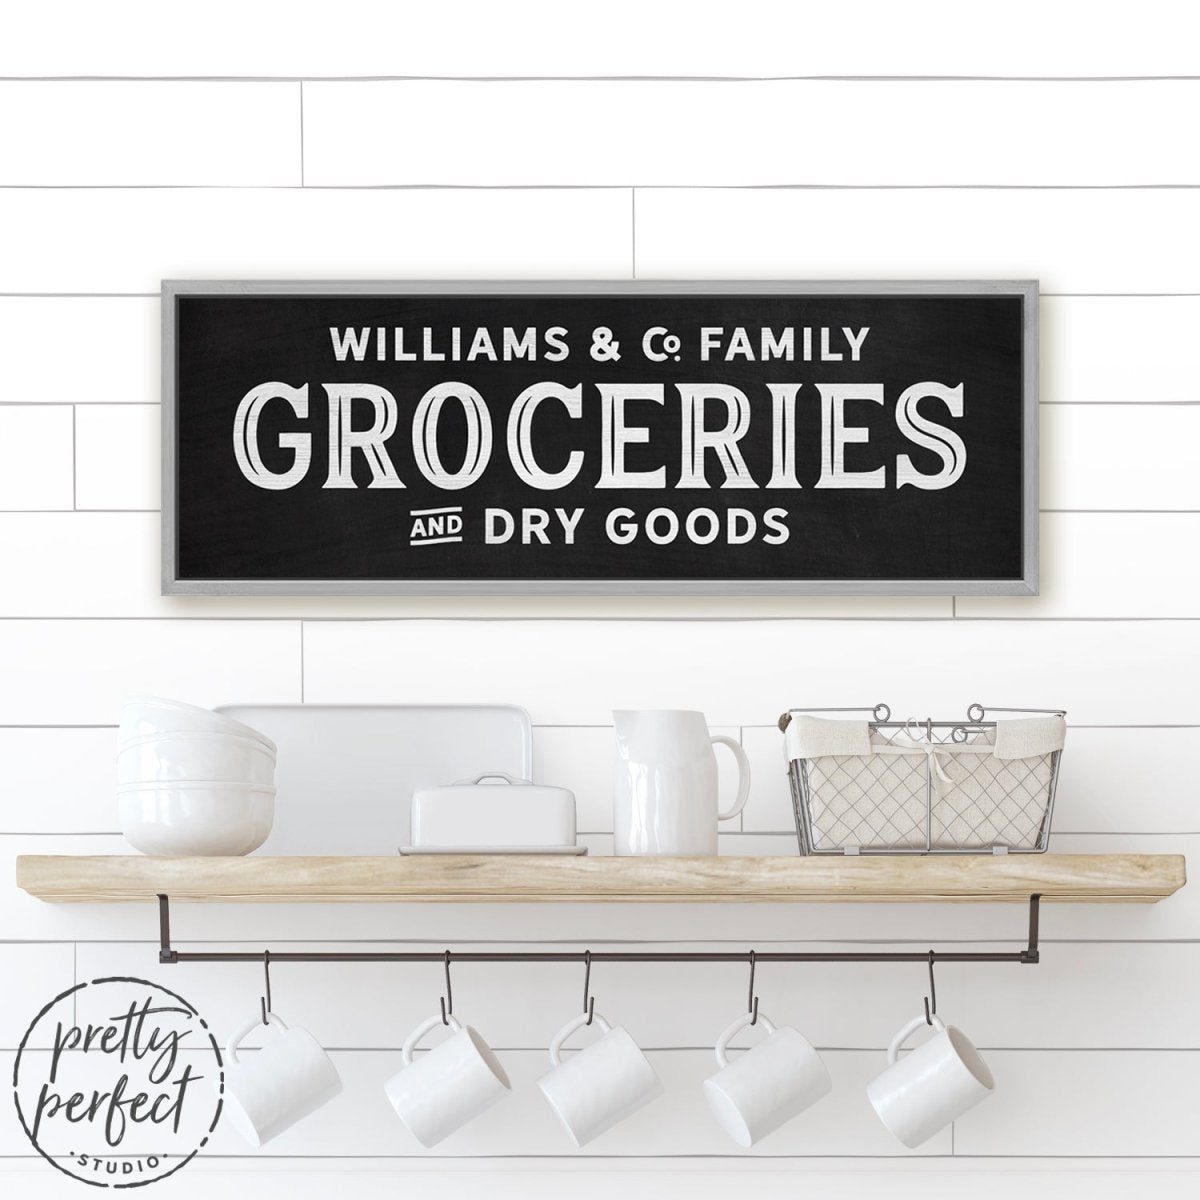 Personalized Family Grocery Sign Hanging in Kitchen Above Shelf - Pretty Perfect Studio